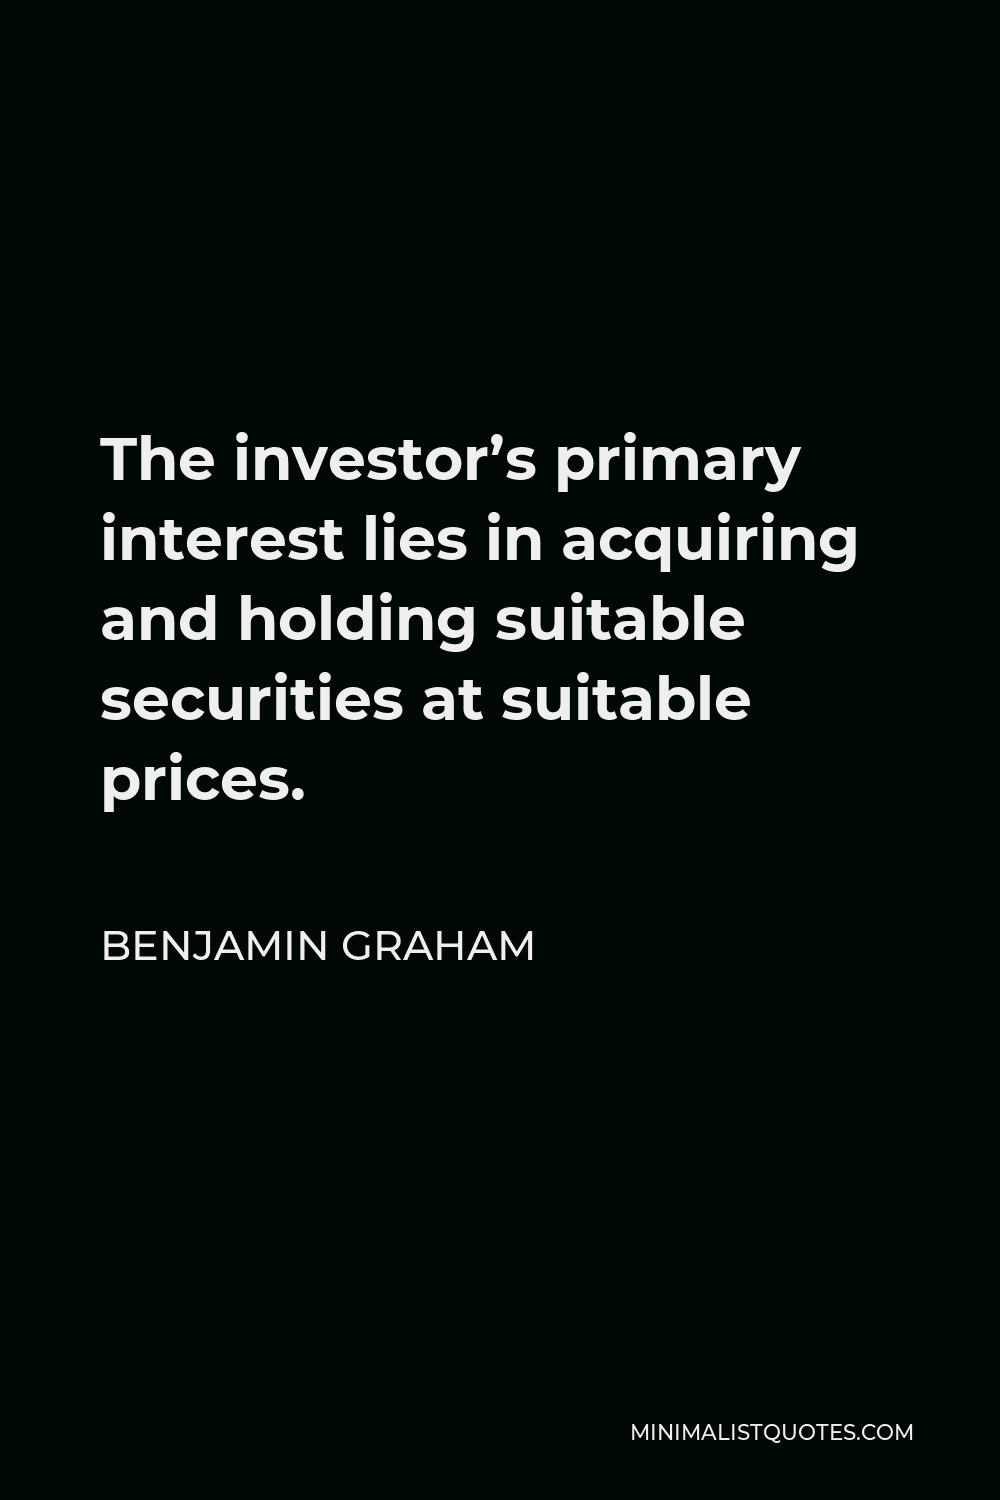 Benjamin Graham Quote - The investor’s primary interest lies in acquiring and holding suitable securities at suitable prices.